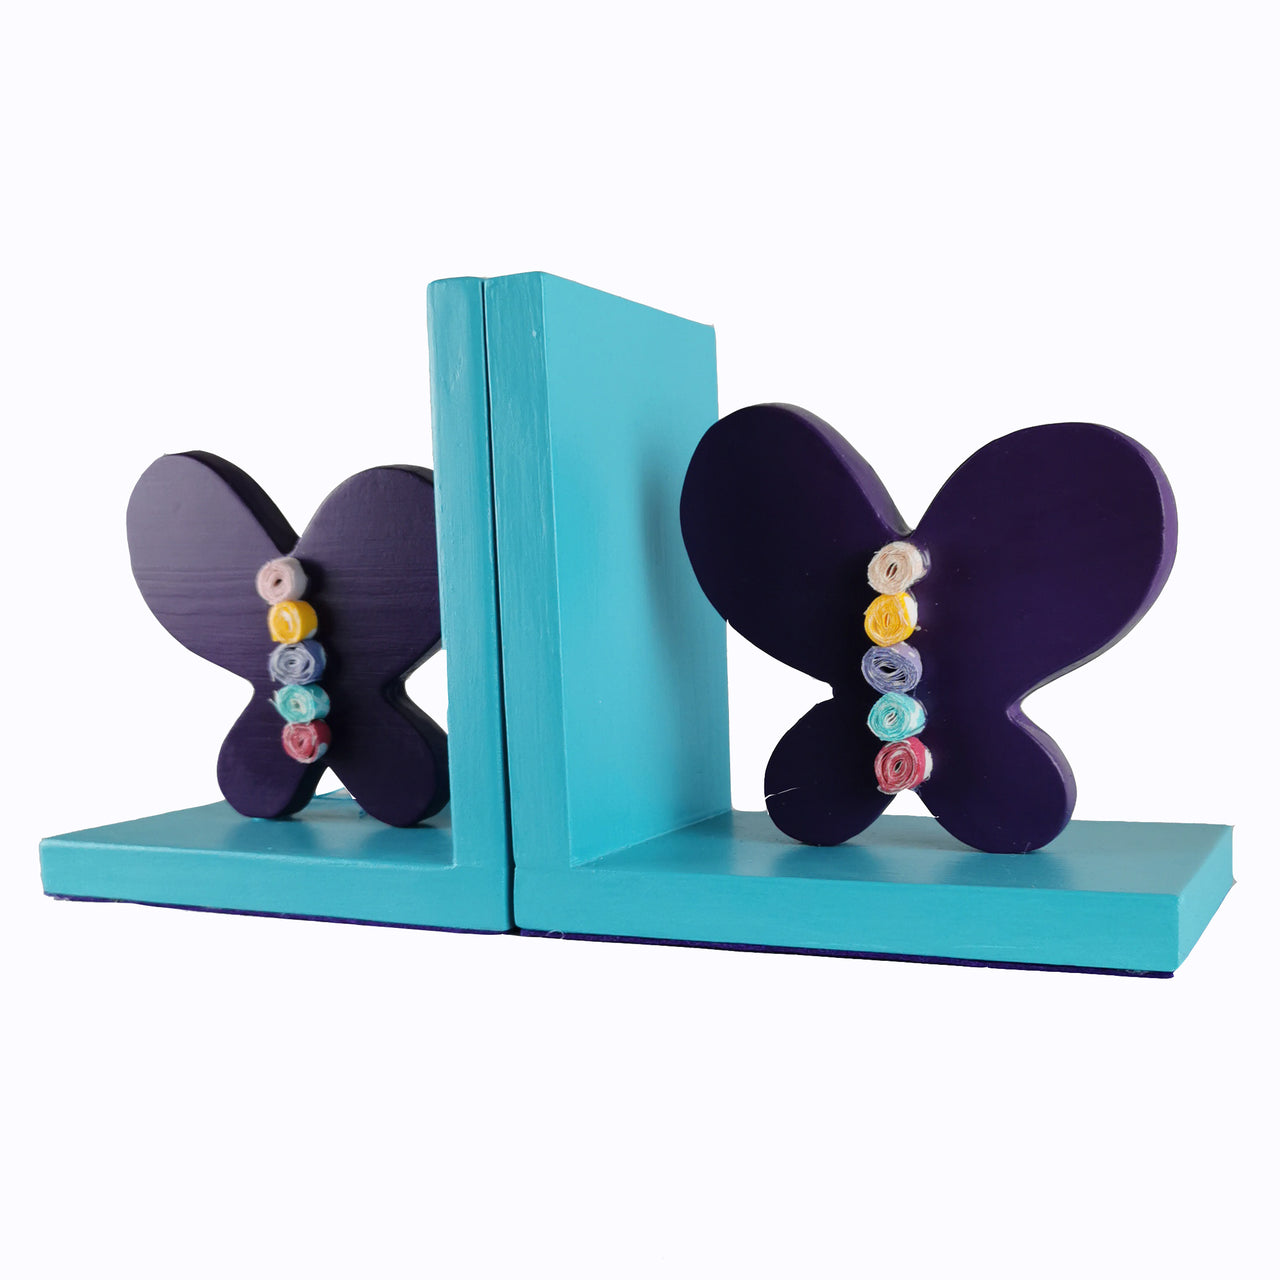  This exquisite bookend with a turquoise wooden base and a purple butterfly design will bring colour and imagination to your child's bedroom.